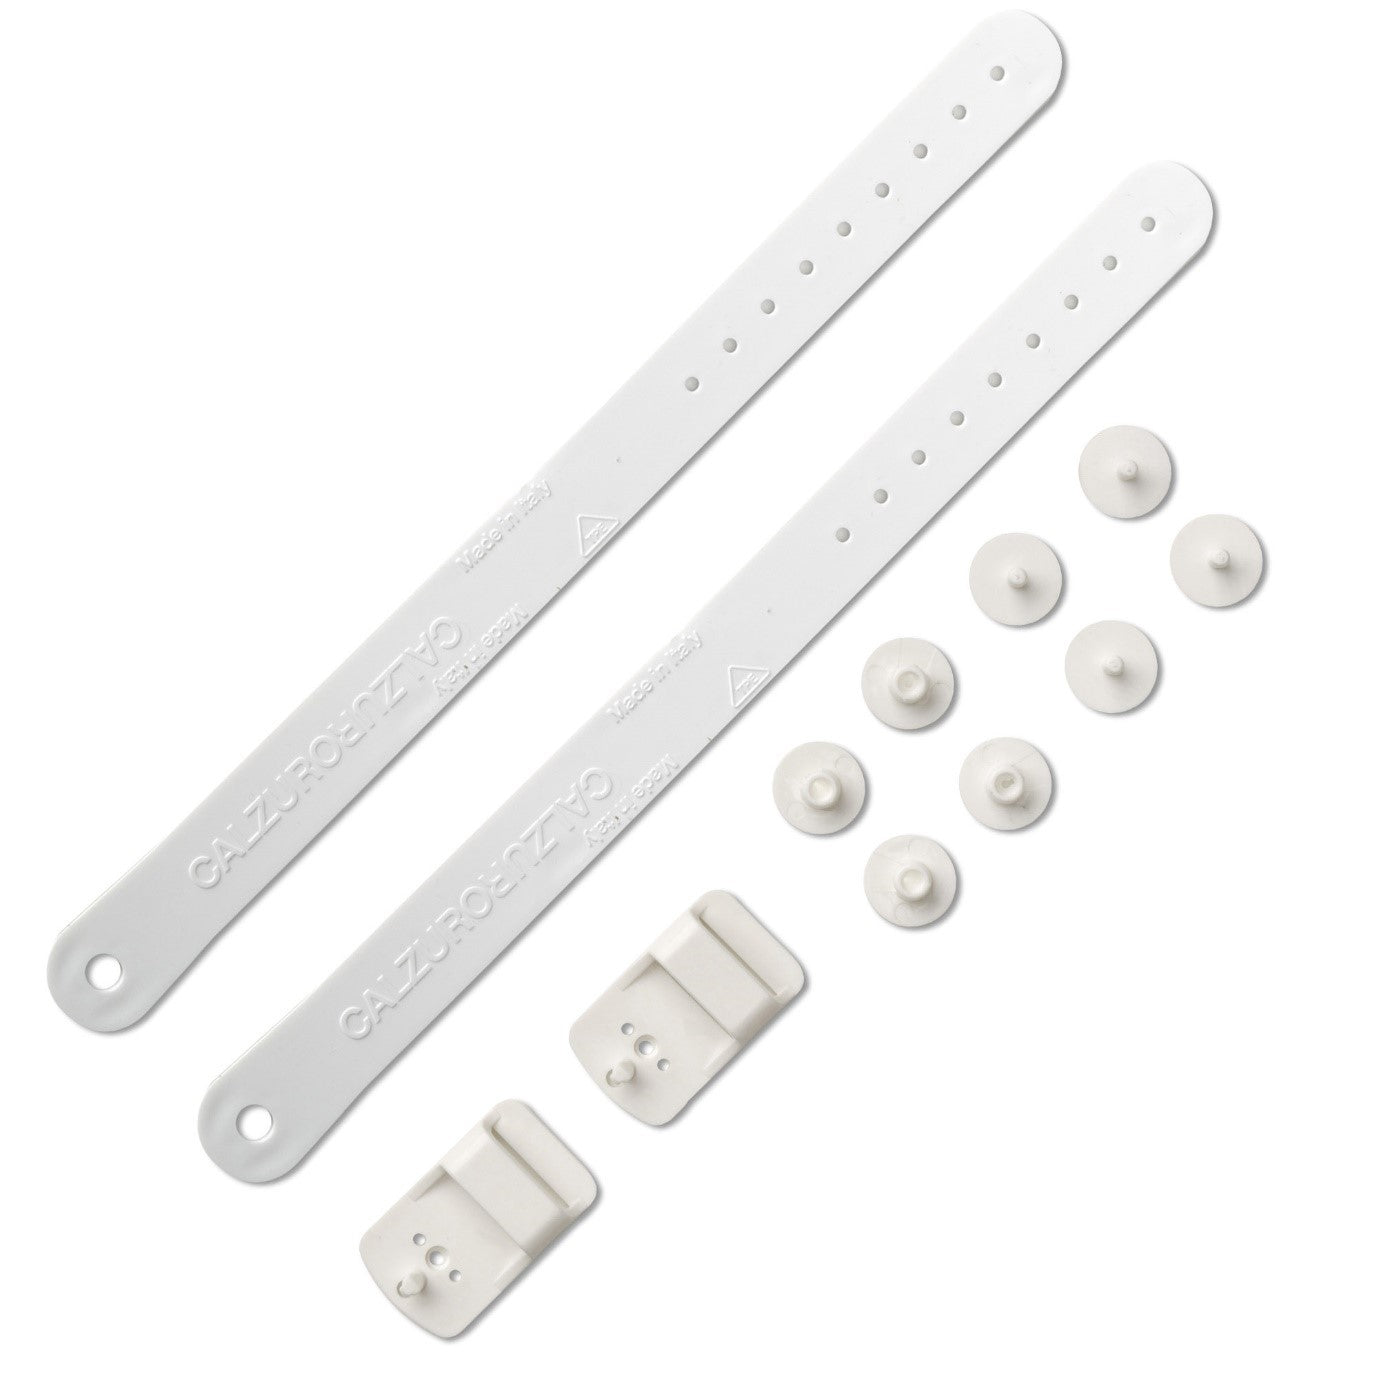 Heel Straps Kit for Calzuro Classic Clogs - White